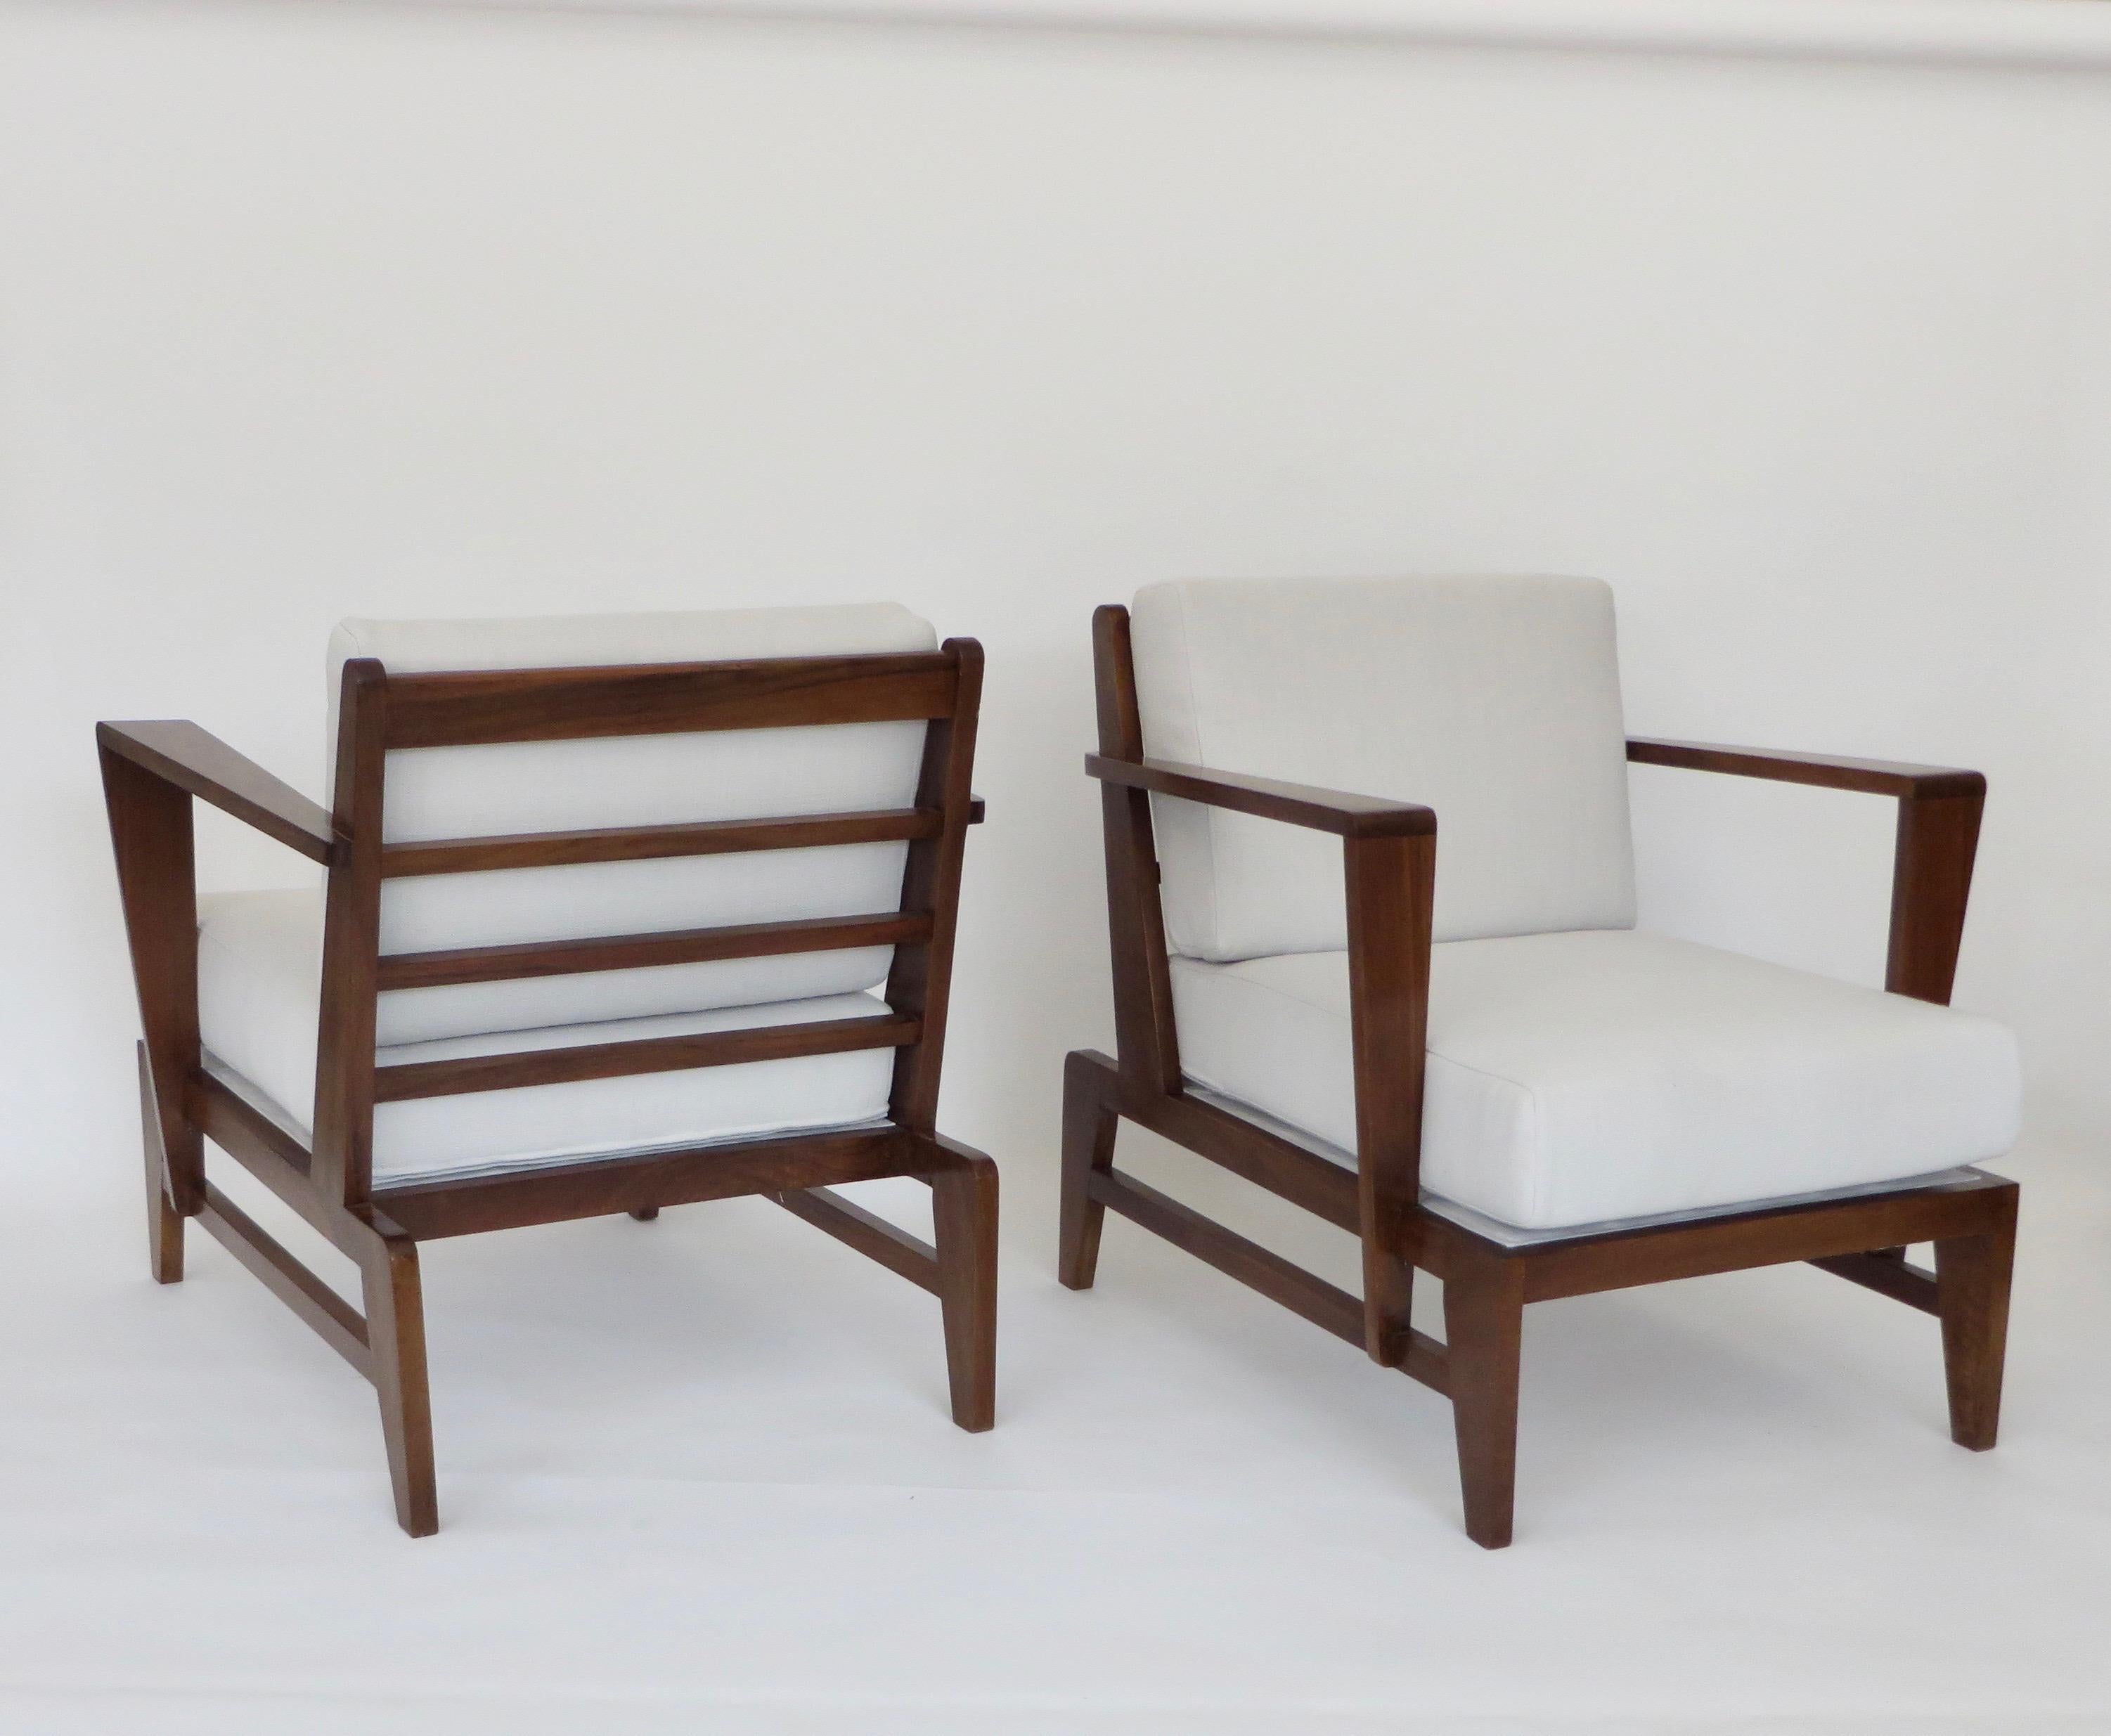 Pair of the most iconic of French cherry wood lounge chairs and armchairs with angled arms and by French designer Rene Gabriel.
Newly upholstered and new cushions done in a cream white French linen with original under springs.
The springs are